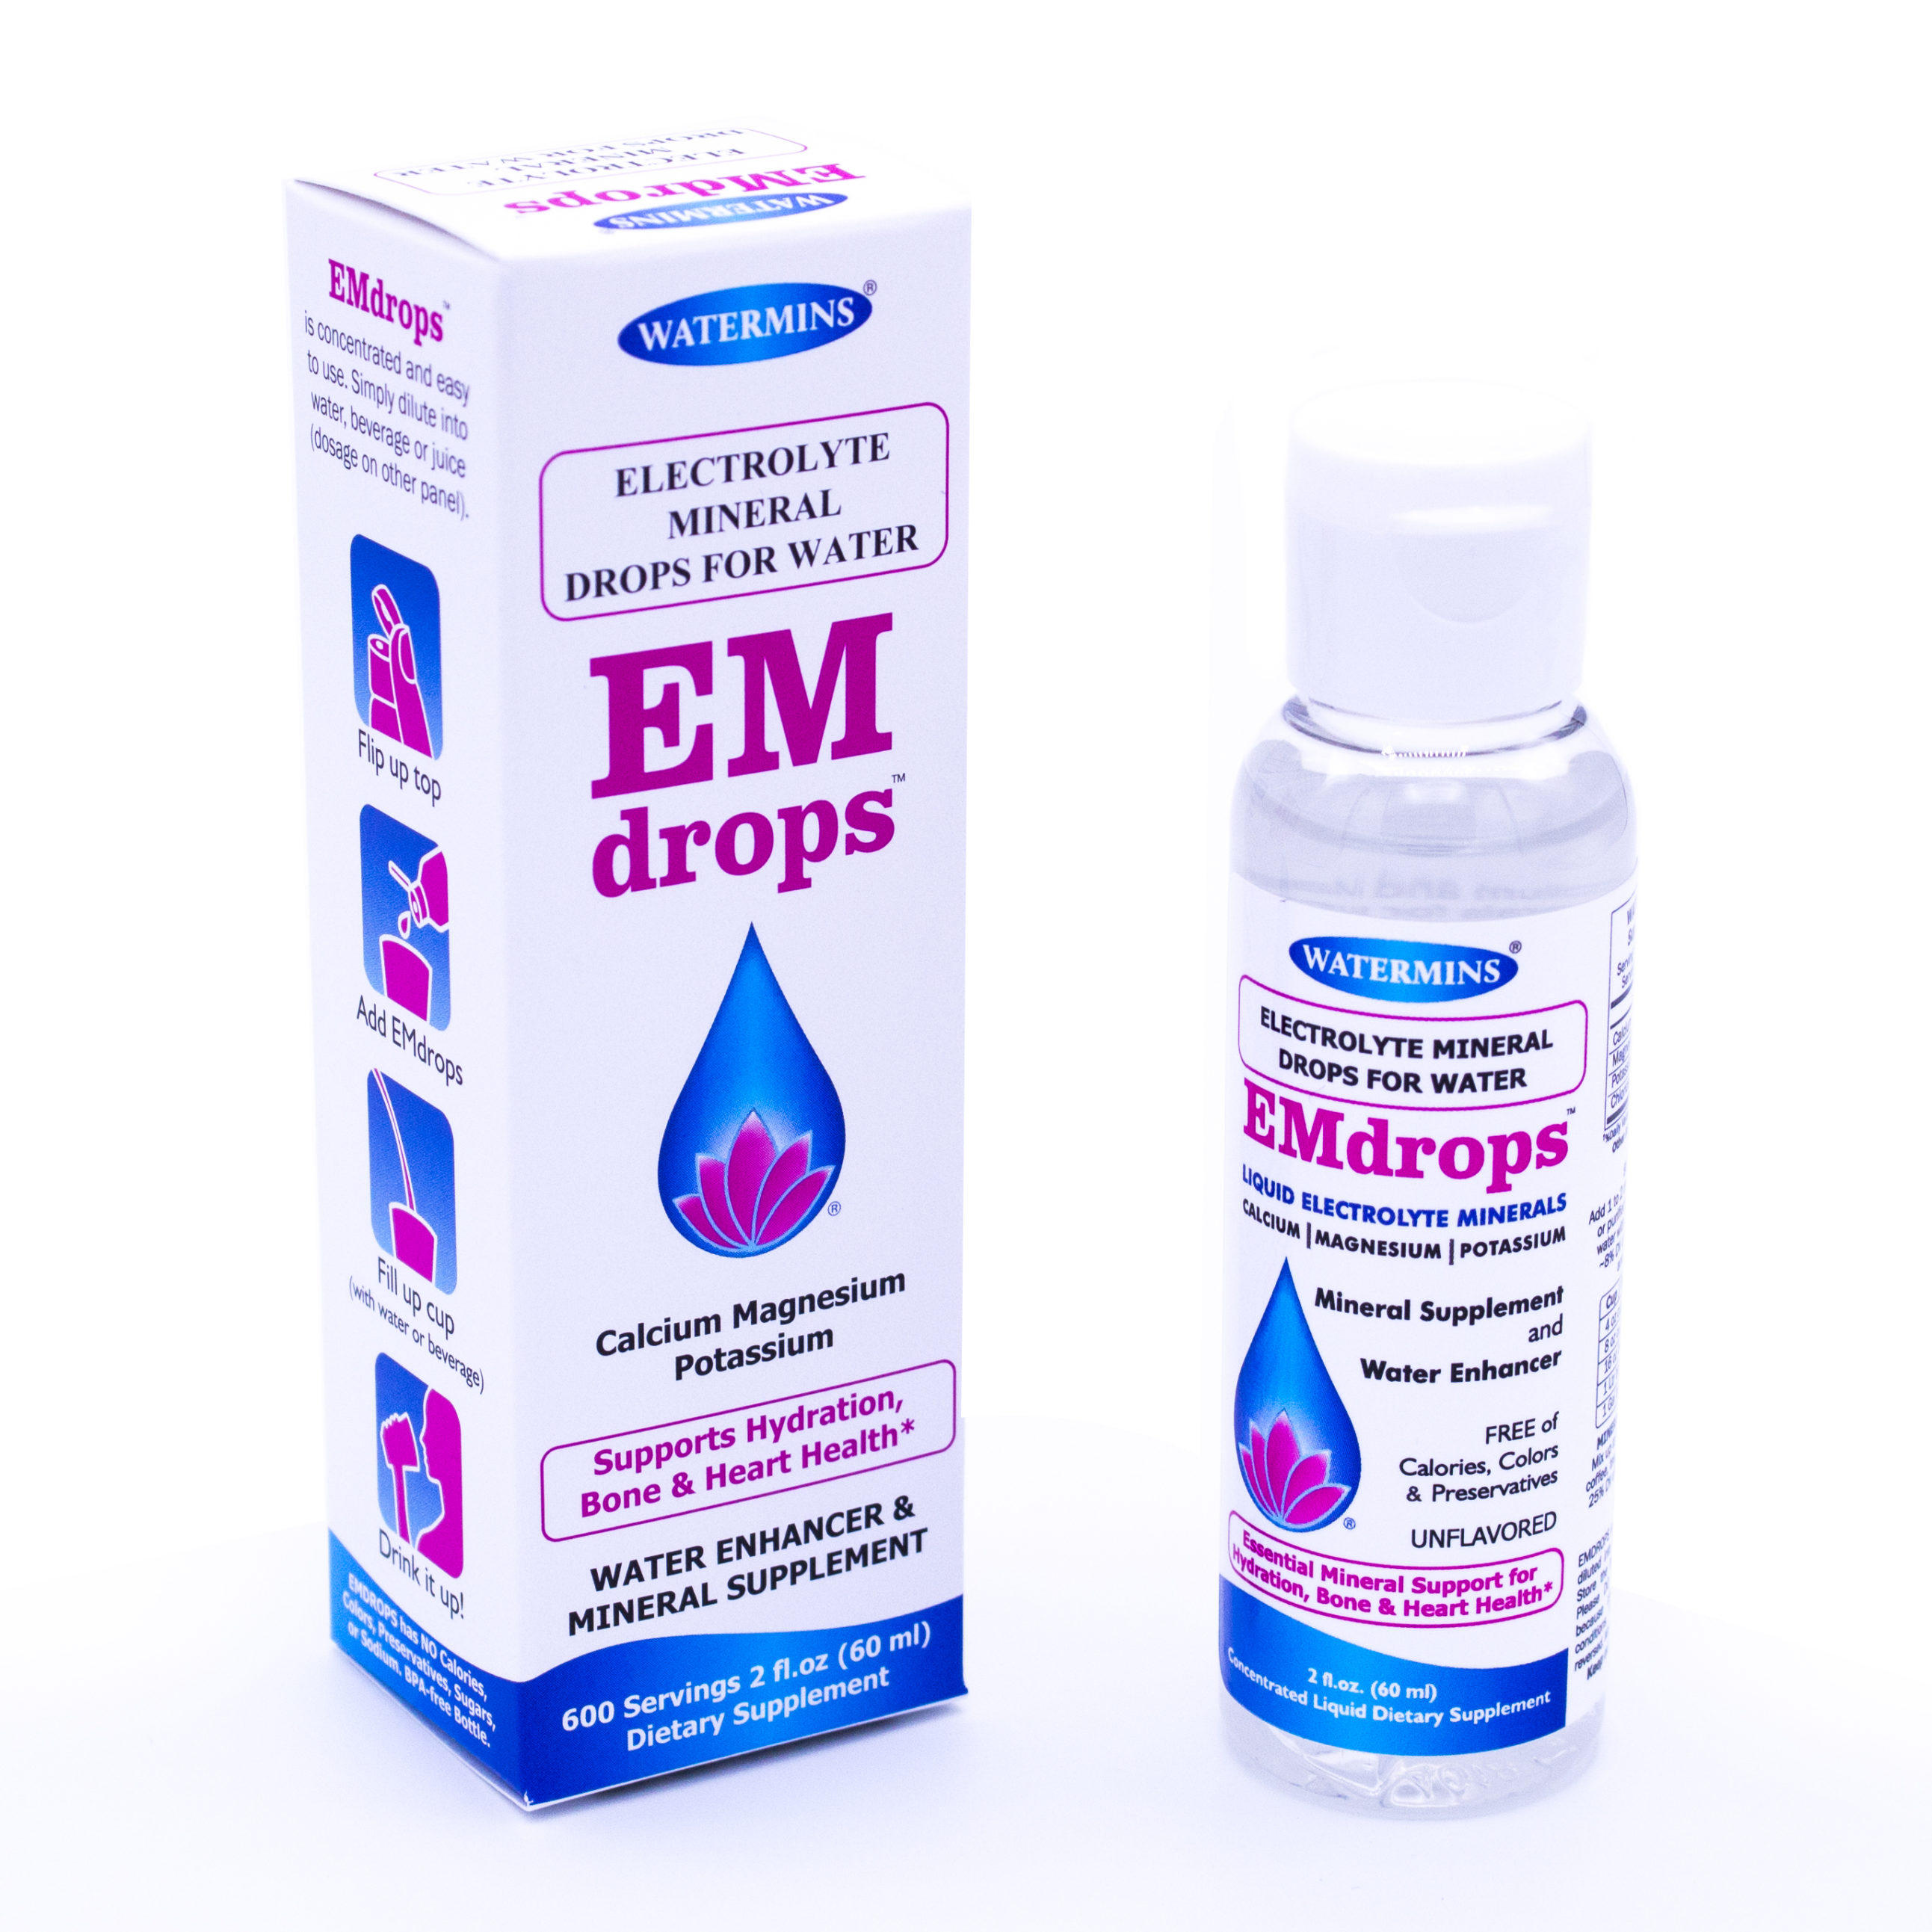 EMDROPS carton and bottle front view. EMDROPS is available at Amazon.com